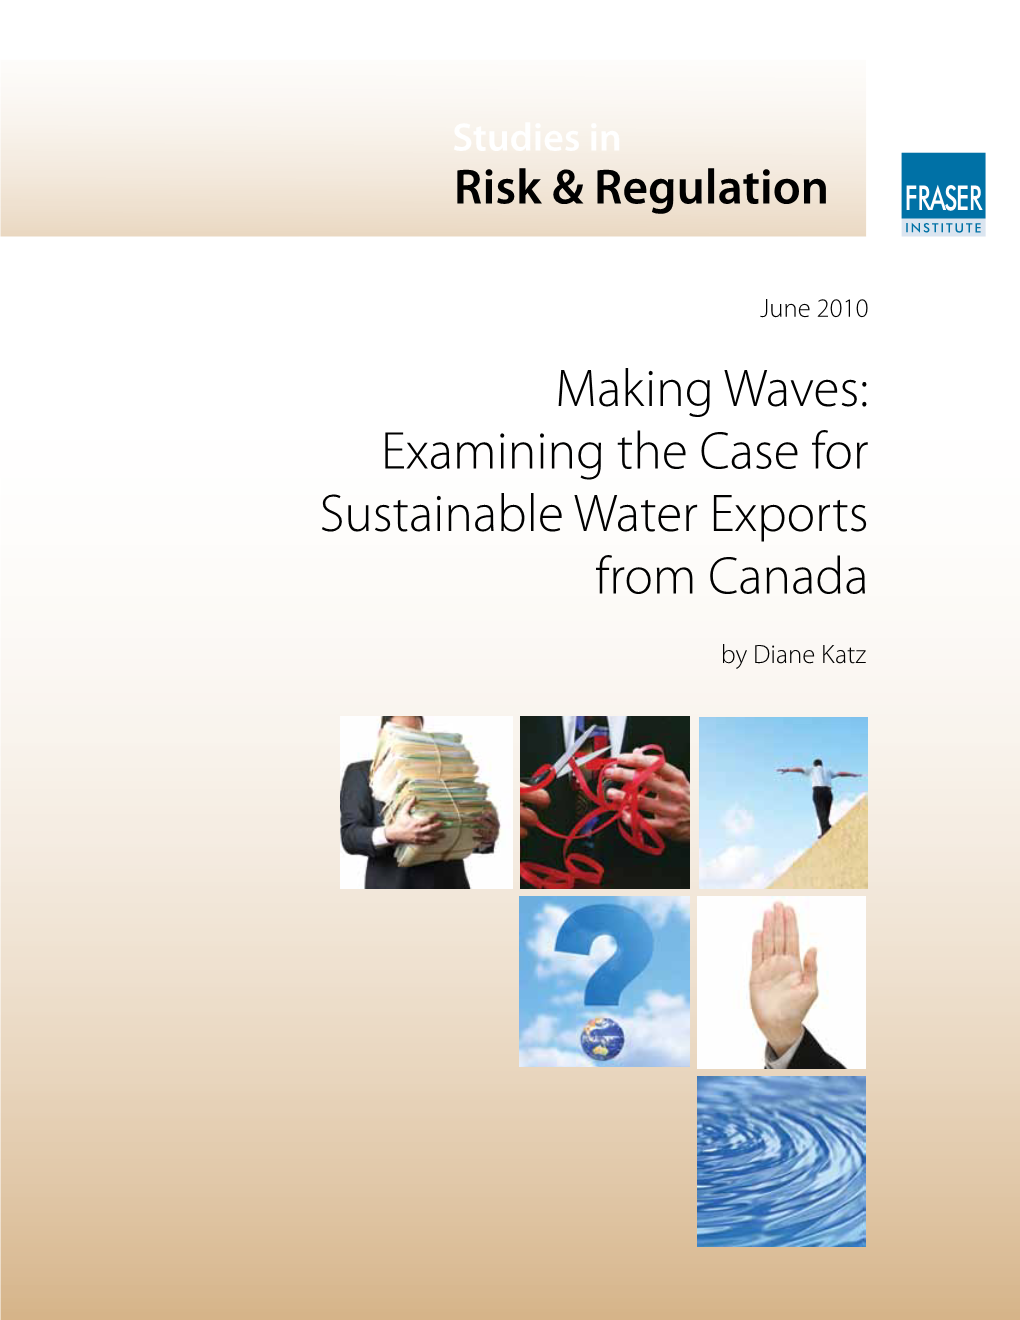 Examining the Case for Sustainable Water Exports from Canada